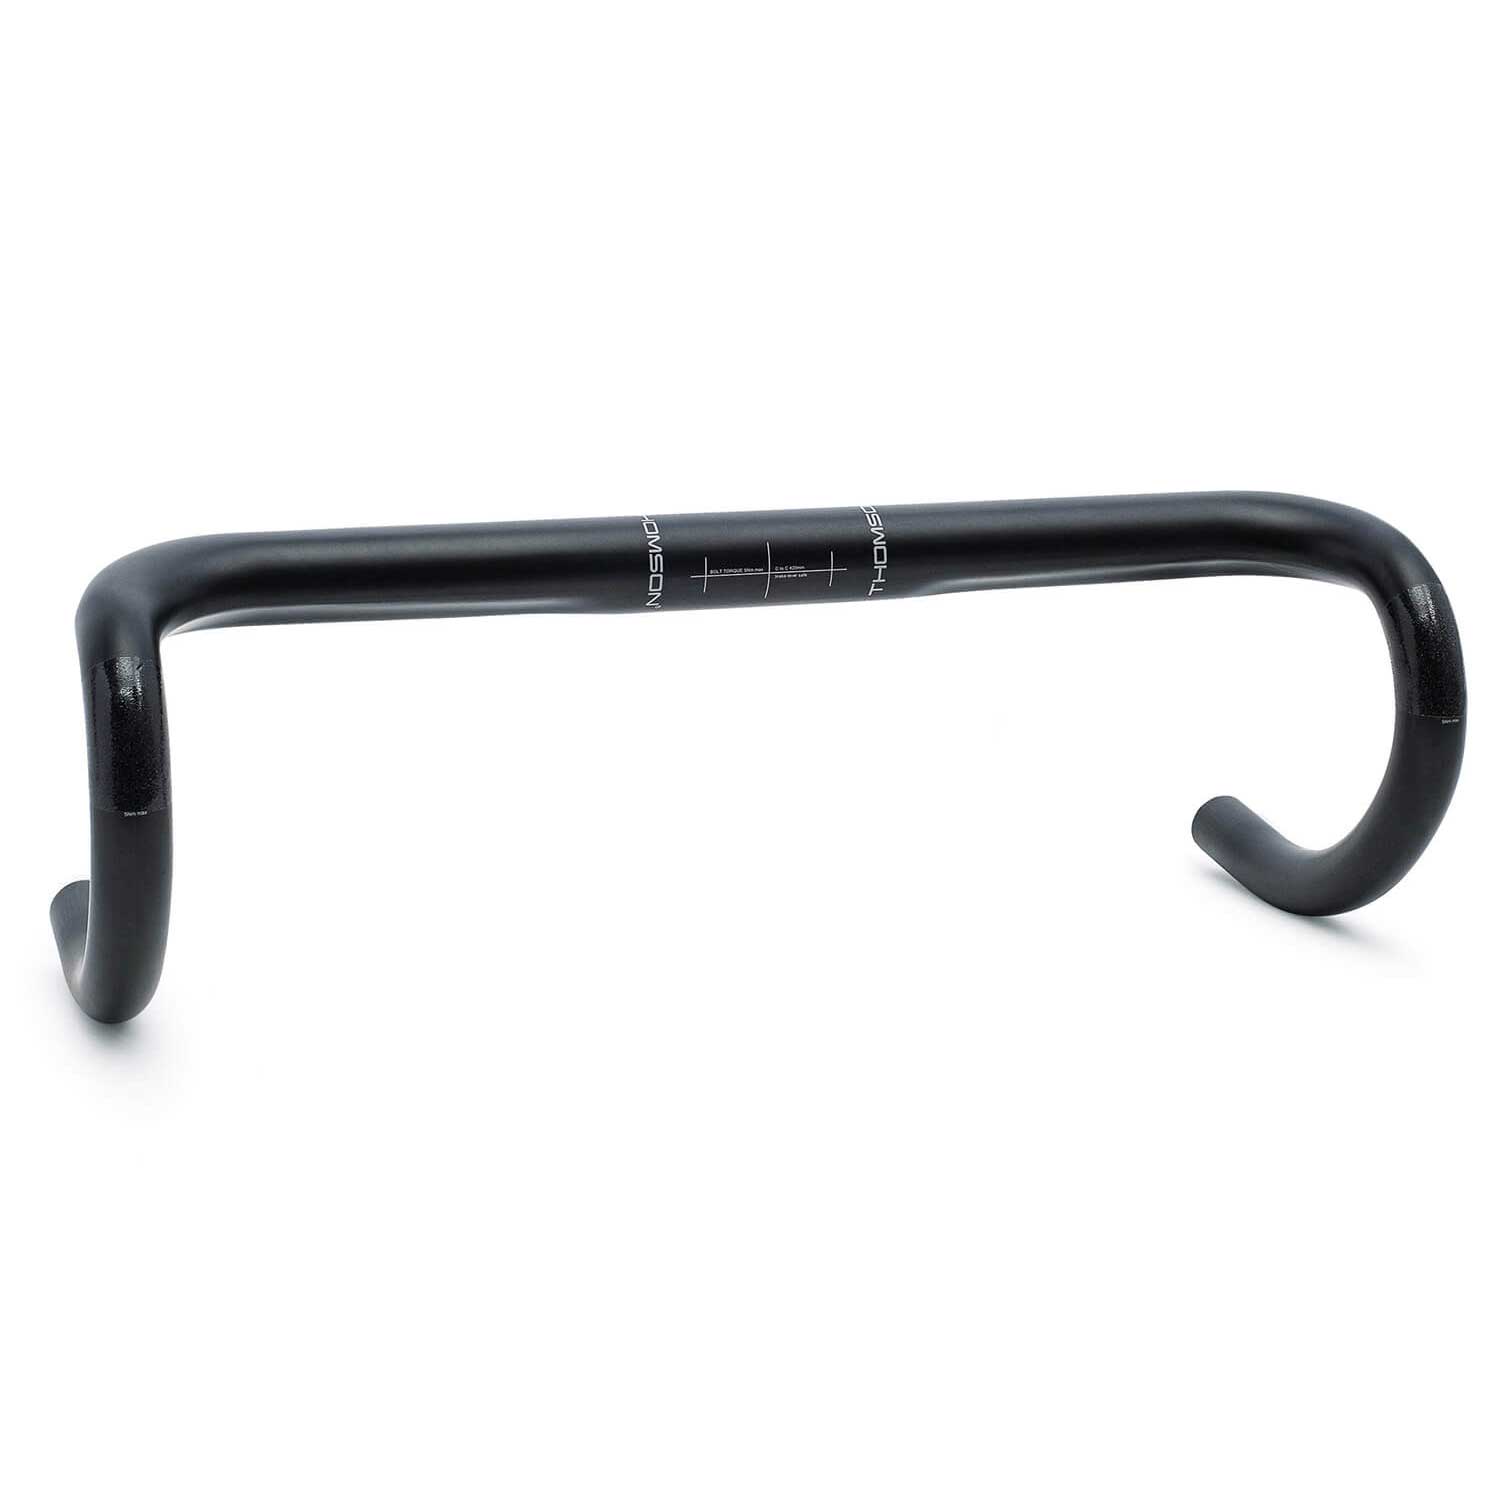 Picture of Thomson Road 31.8 Carbon Handle Bar